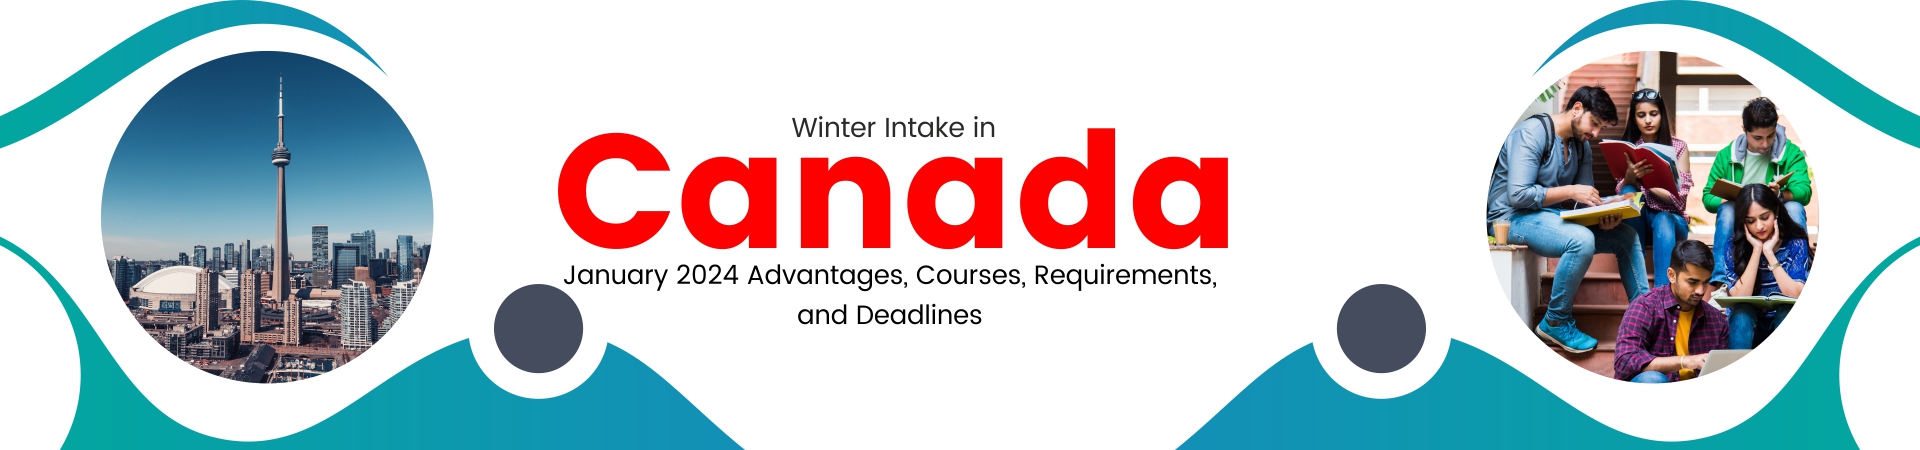 Winter Intake in Canada January 2024: Advantages, Courses, Requirements, and Deadlines